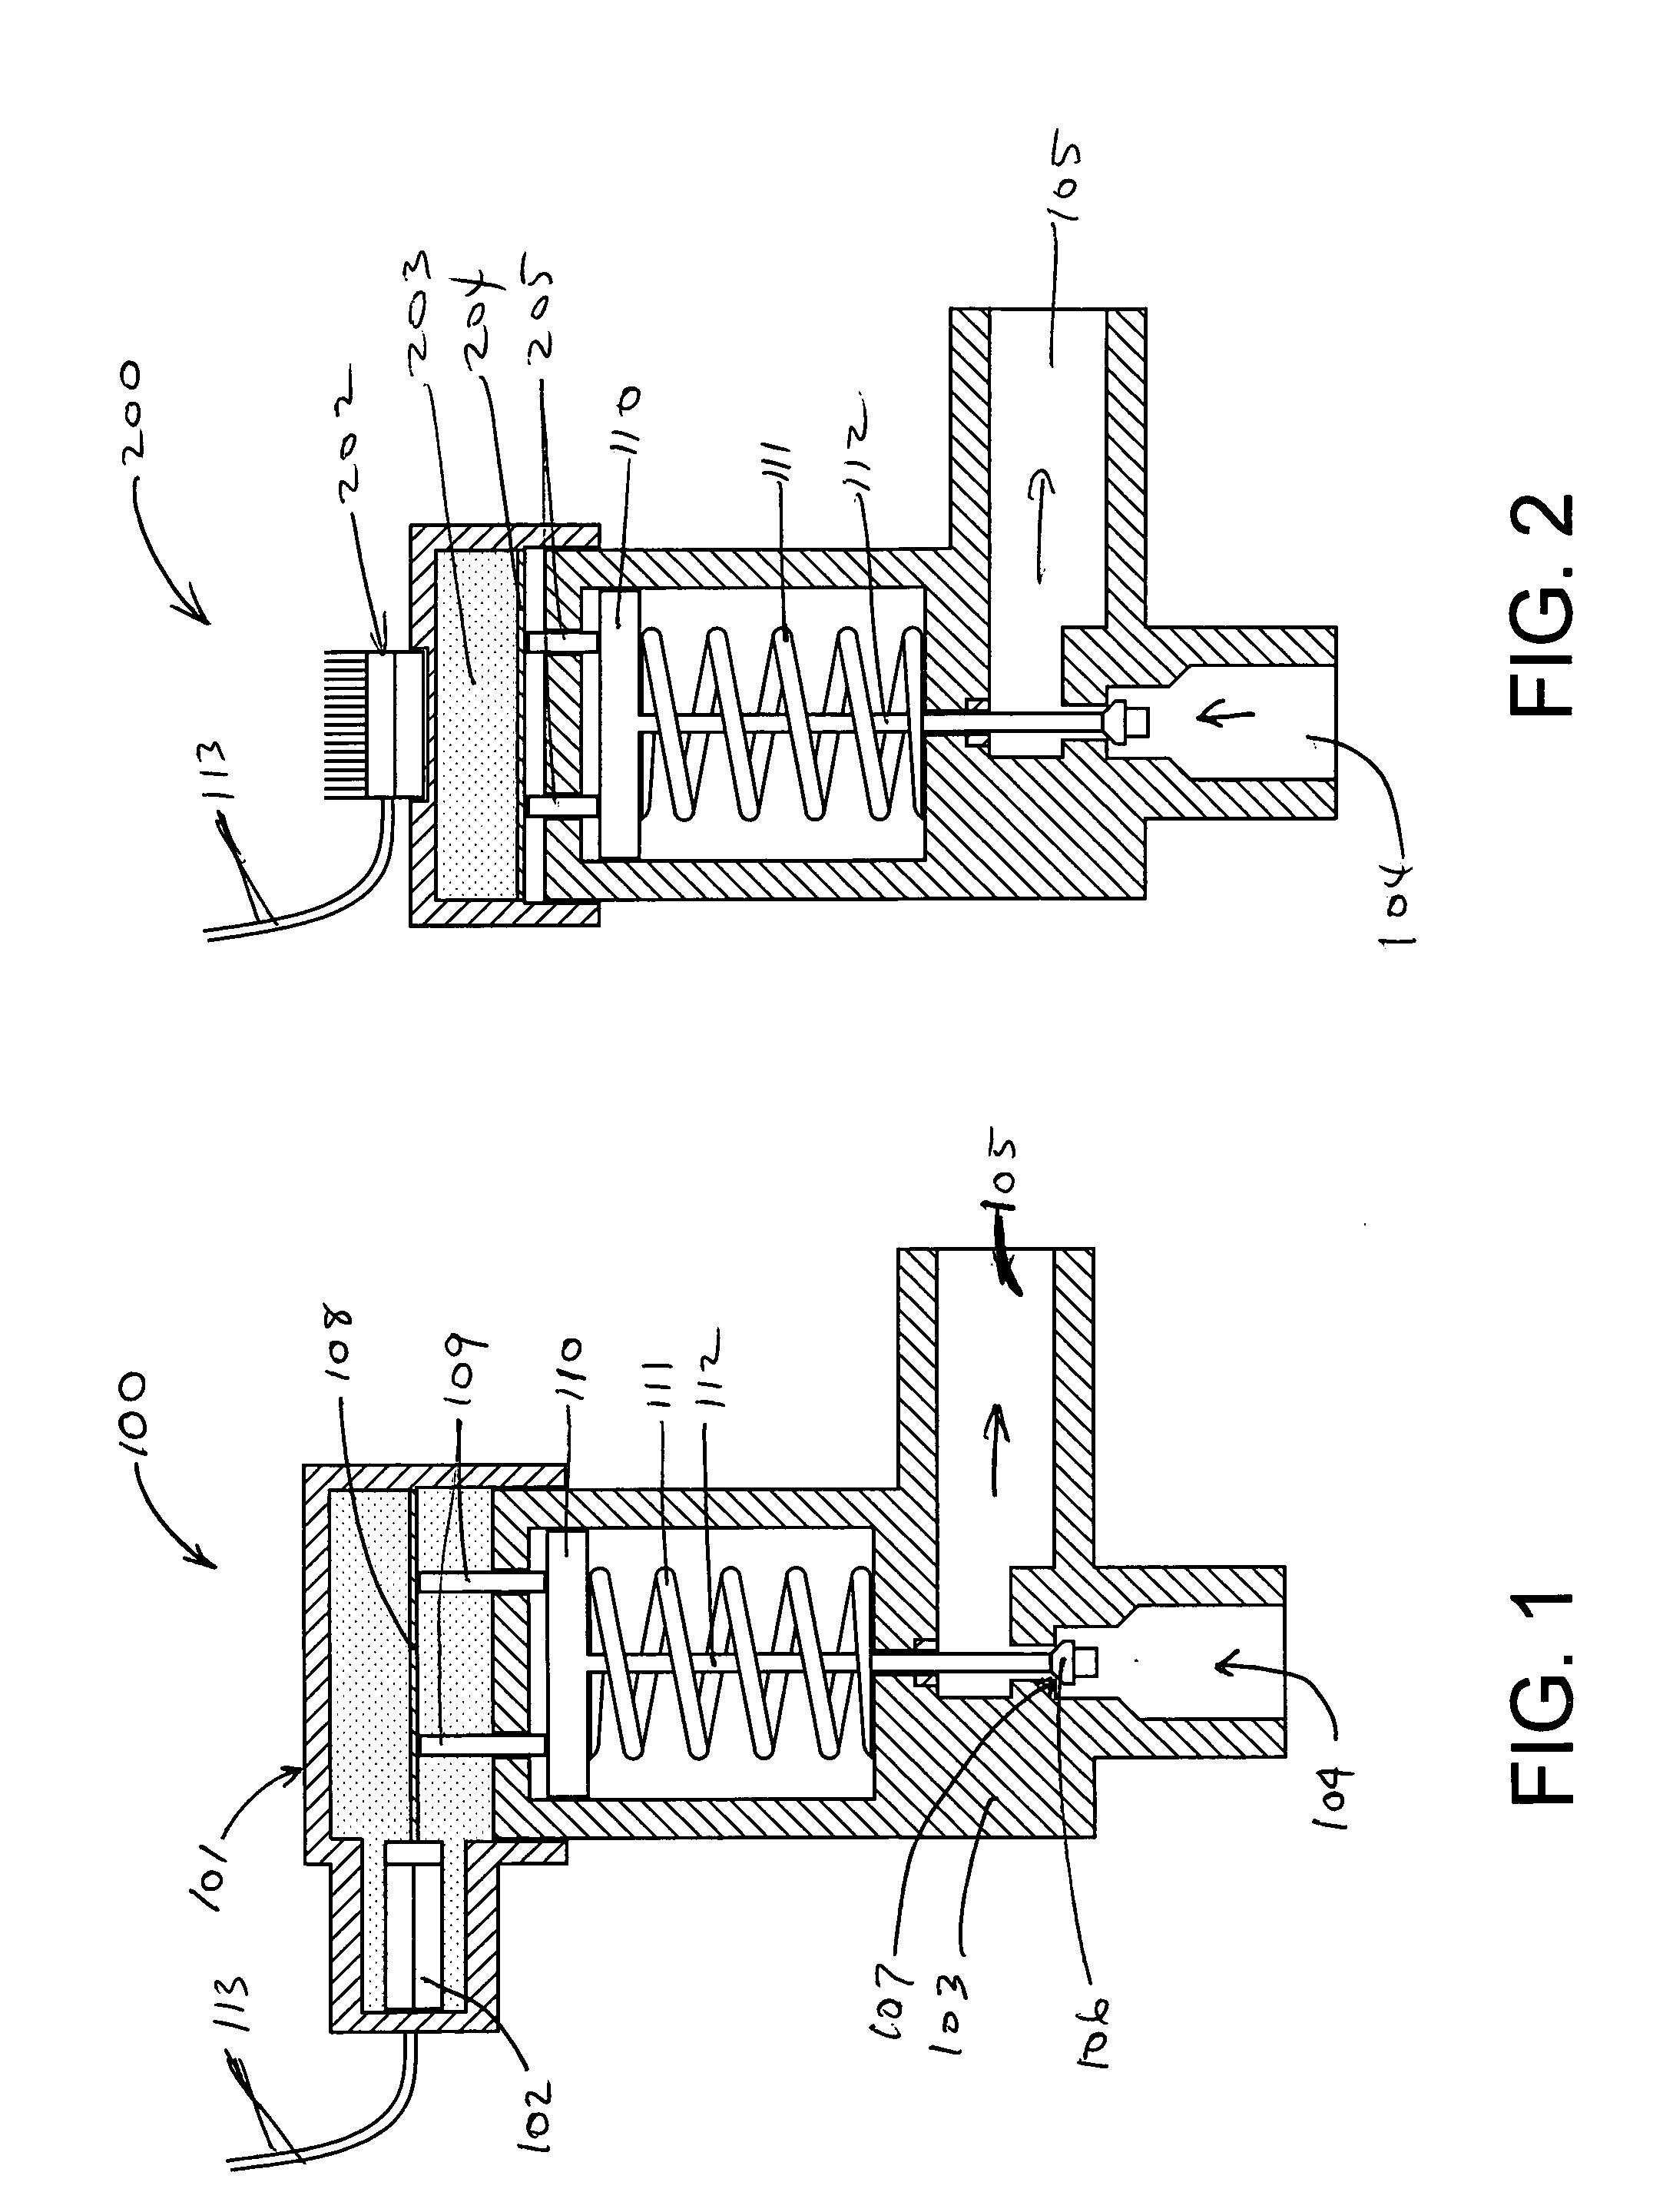 Valves having a thermostatic actuator controlled by a peltier device